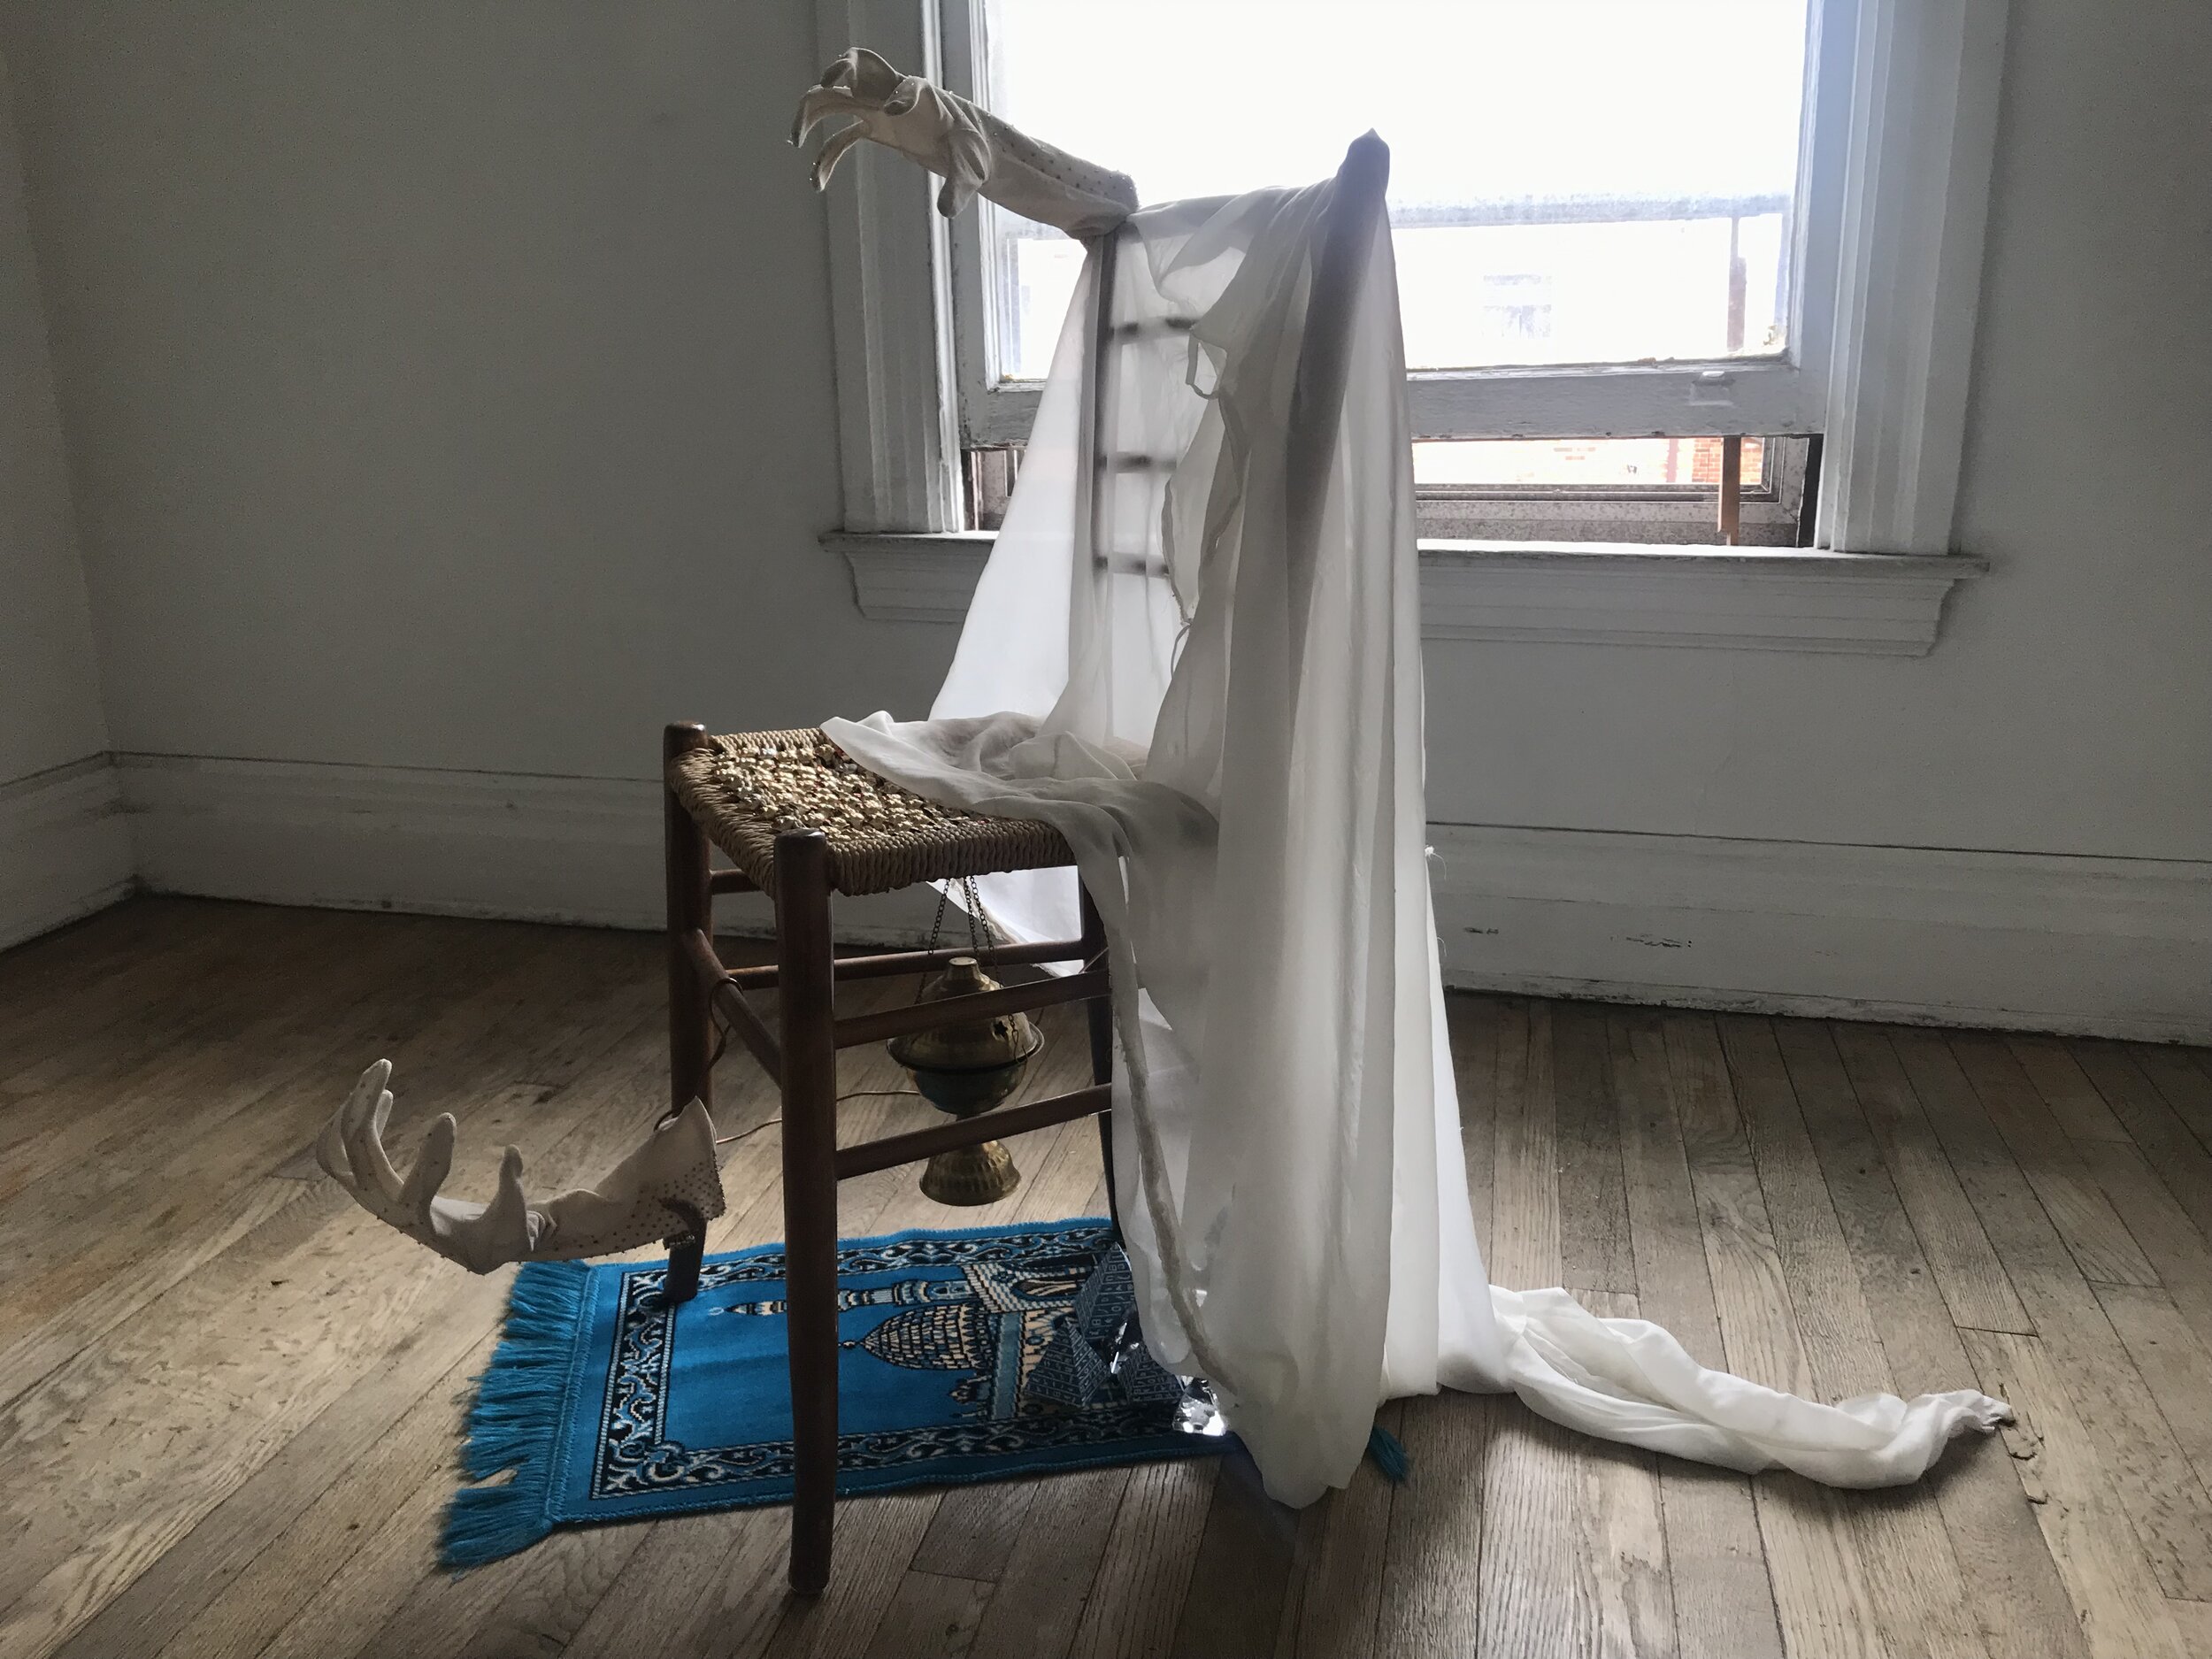   The Victim,  2019  chiffon prayer scarf,  wood and wicker chair, vintage hangers, embroidered gloves, prayer rug, vintage novelty rings, incense holder, copper wire, enamel, souvenir pyramids 